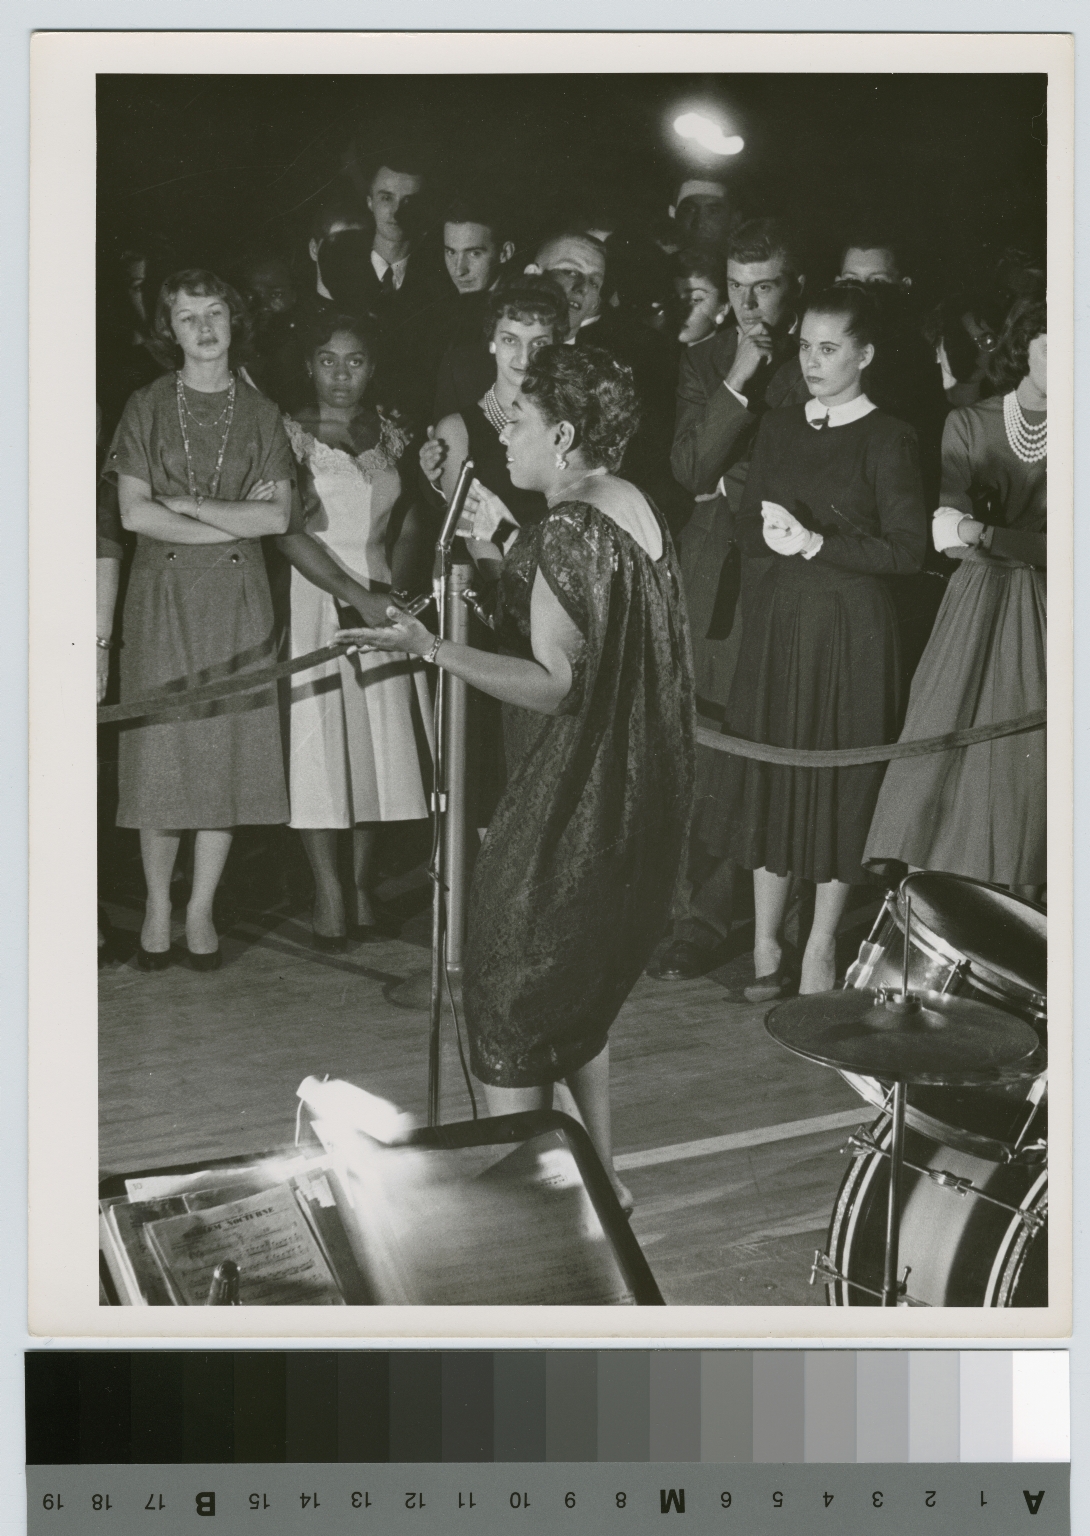 Student activities, concert by Carmen McRae held at the downtown Campus of the Rochester Institute of Technology